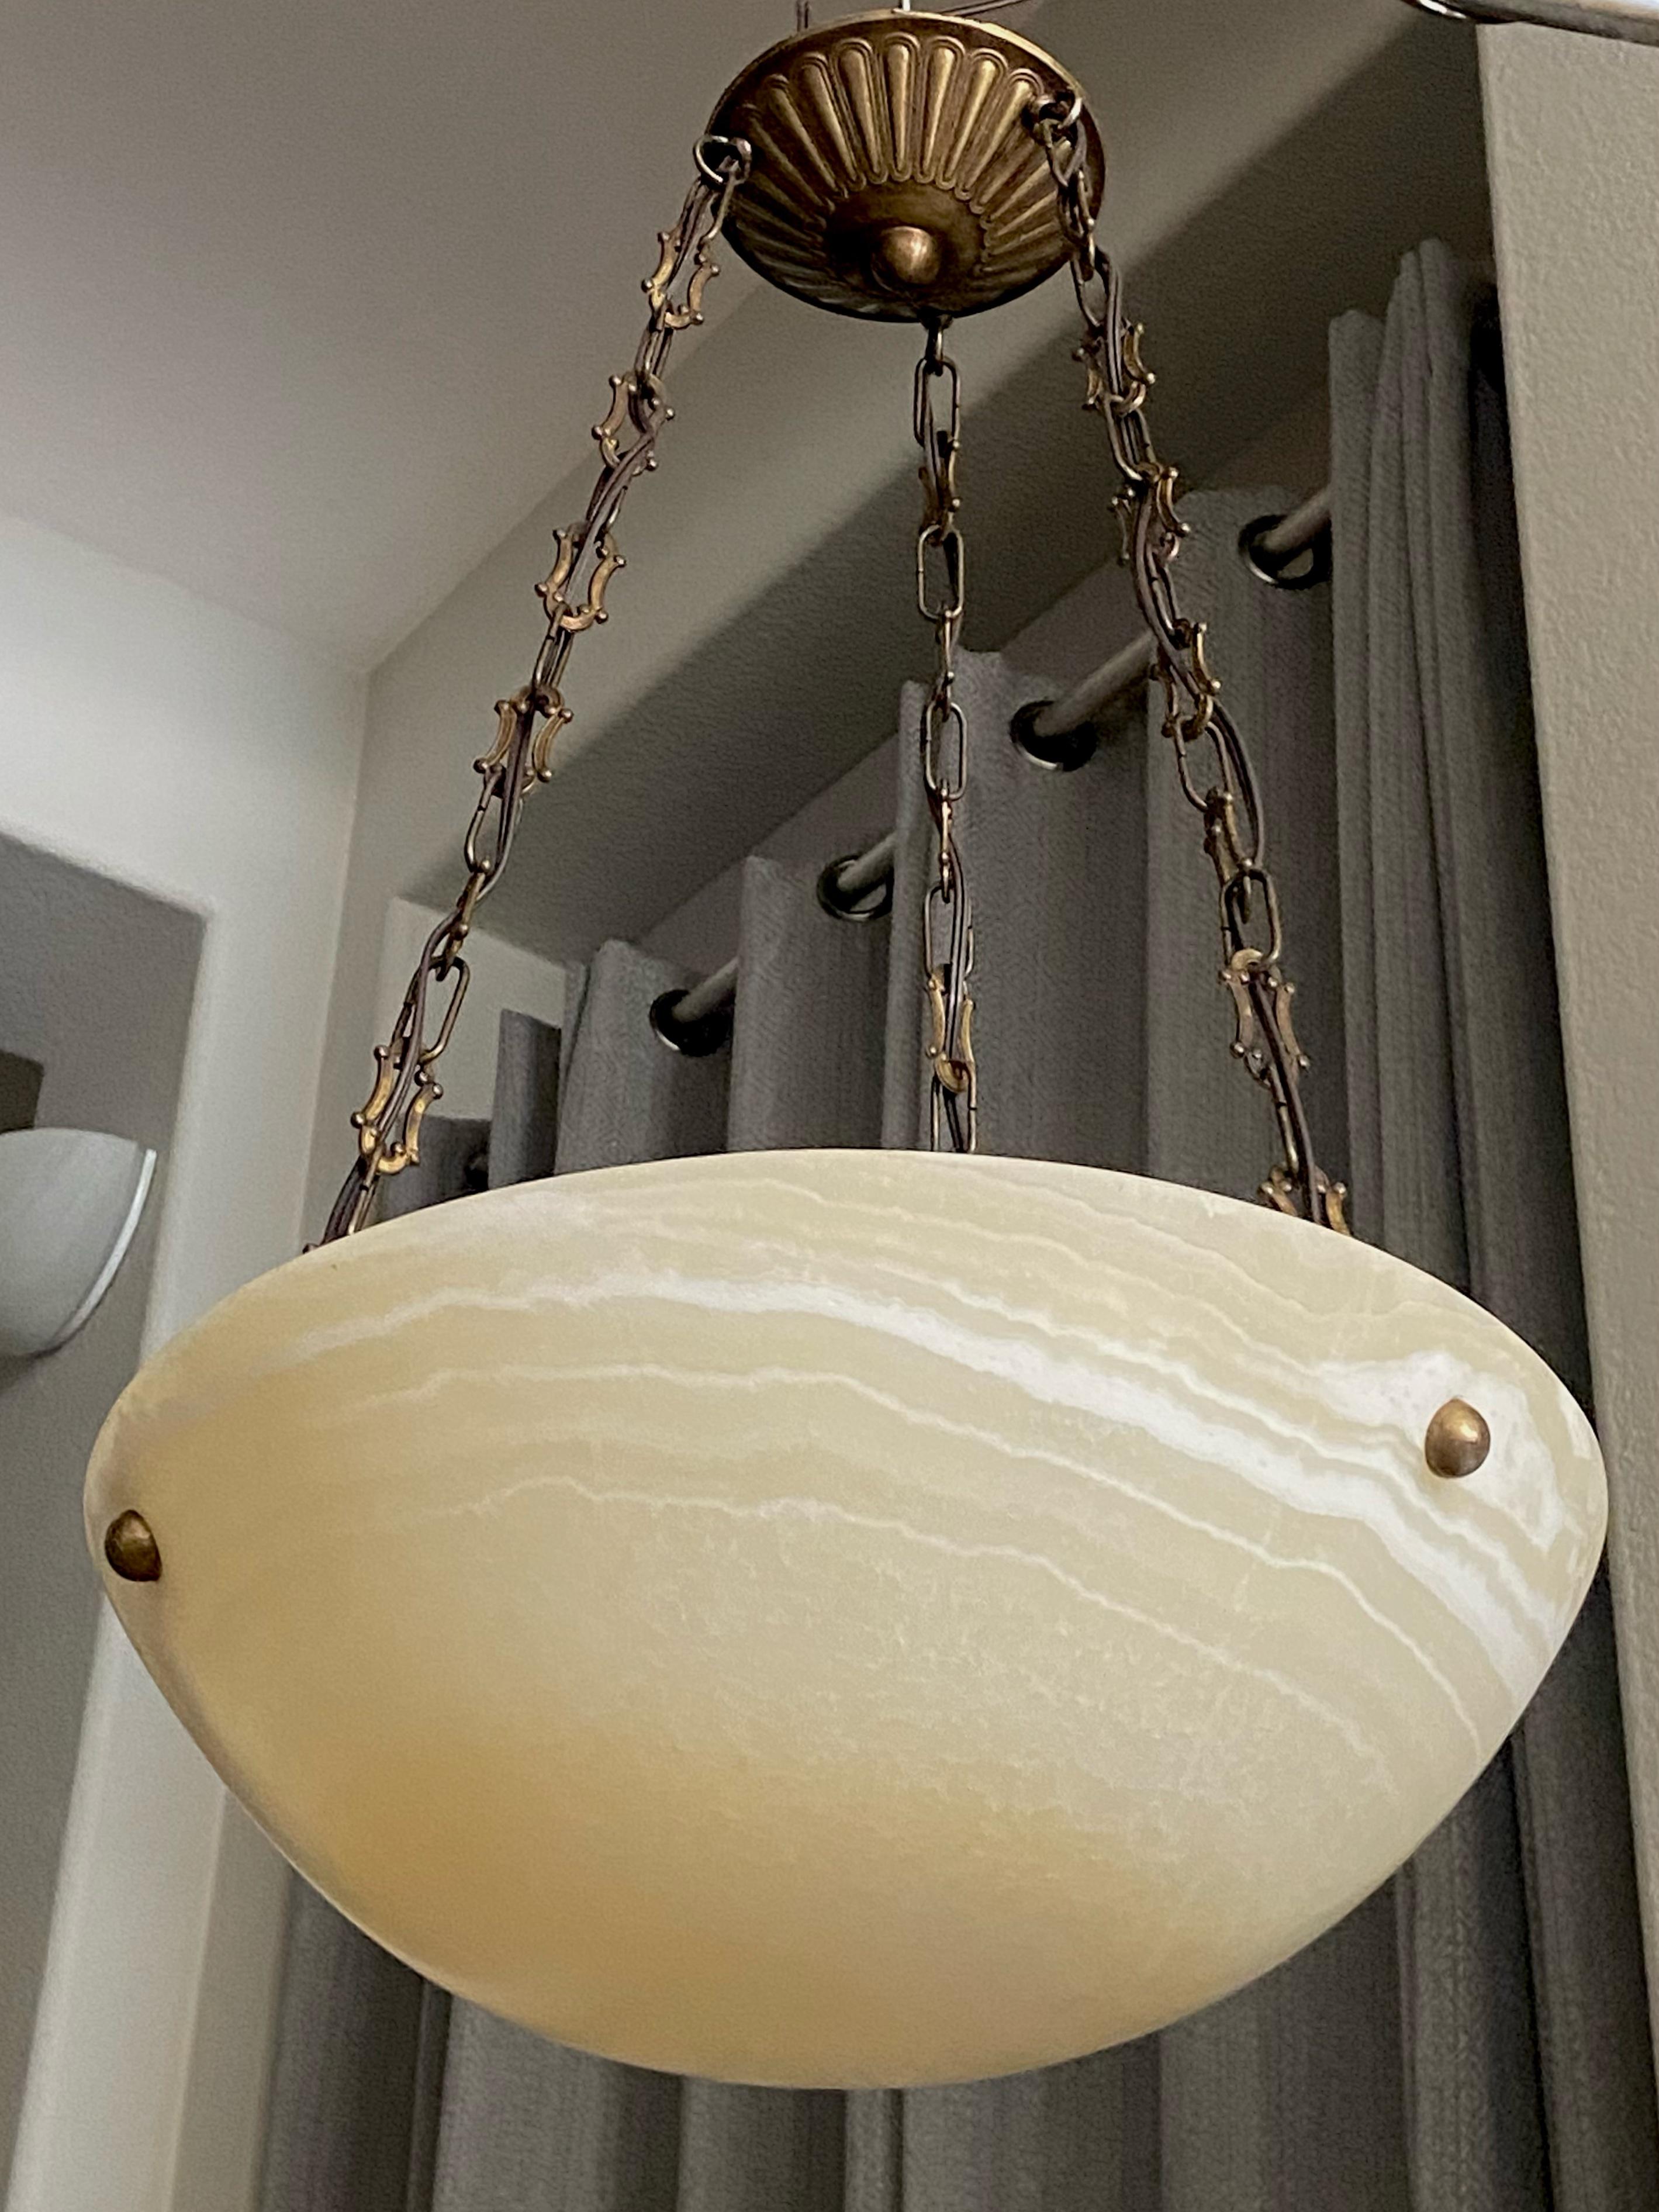 Alabaster pendant light or chandelier with aged patinated brass fittings in the Directoire style. The alabaster has a pale yellow coloring with lots of natural veining throughout. Newly wired for US, fixture uses three candelabra or 